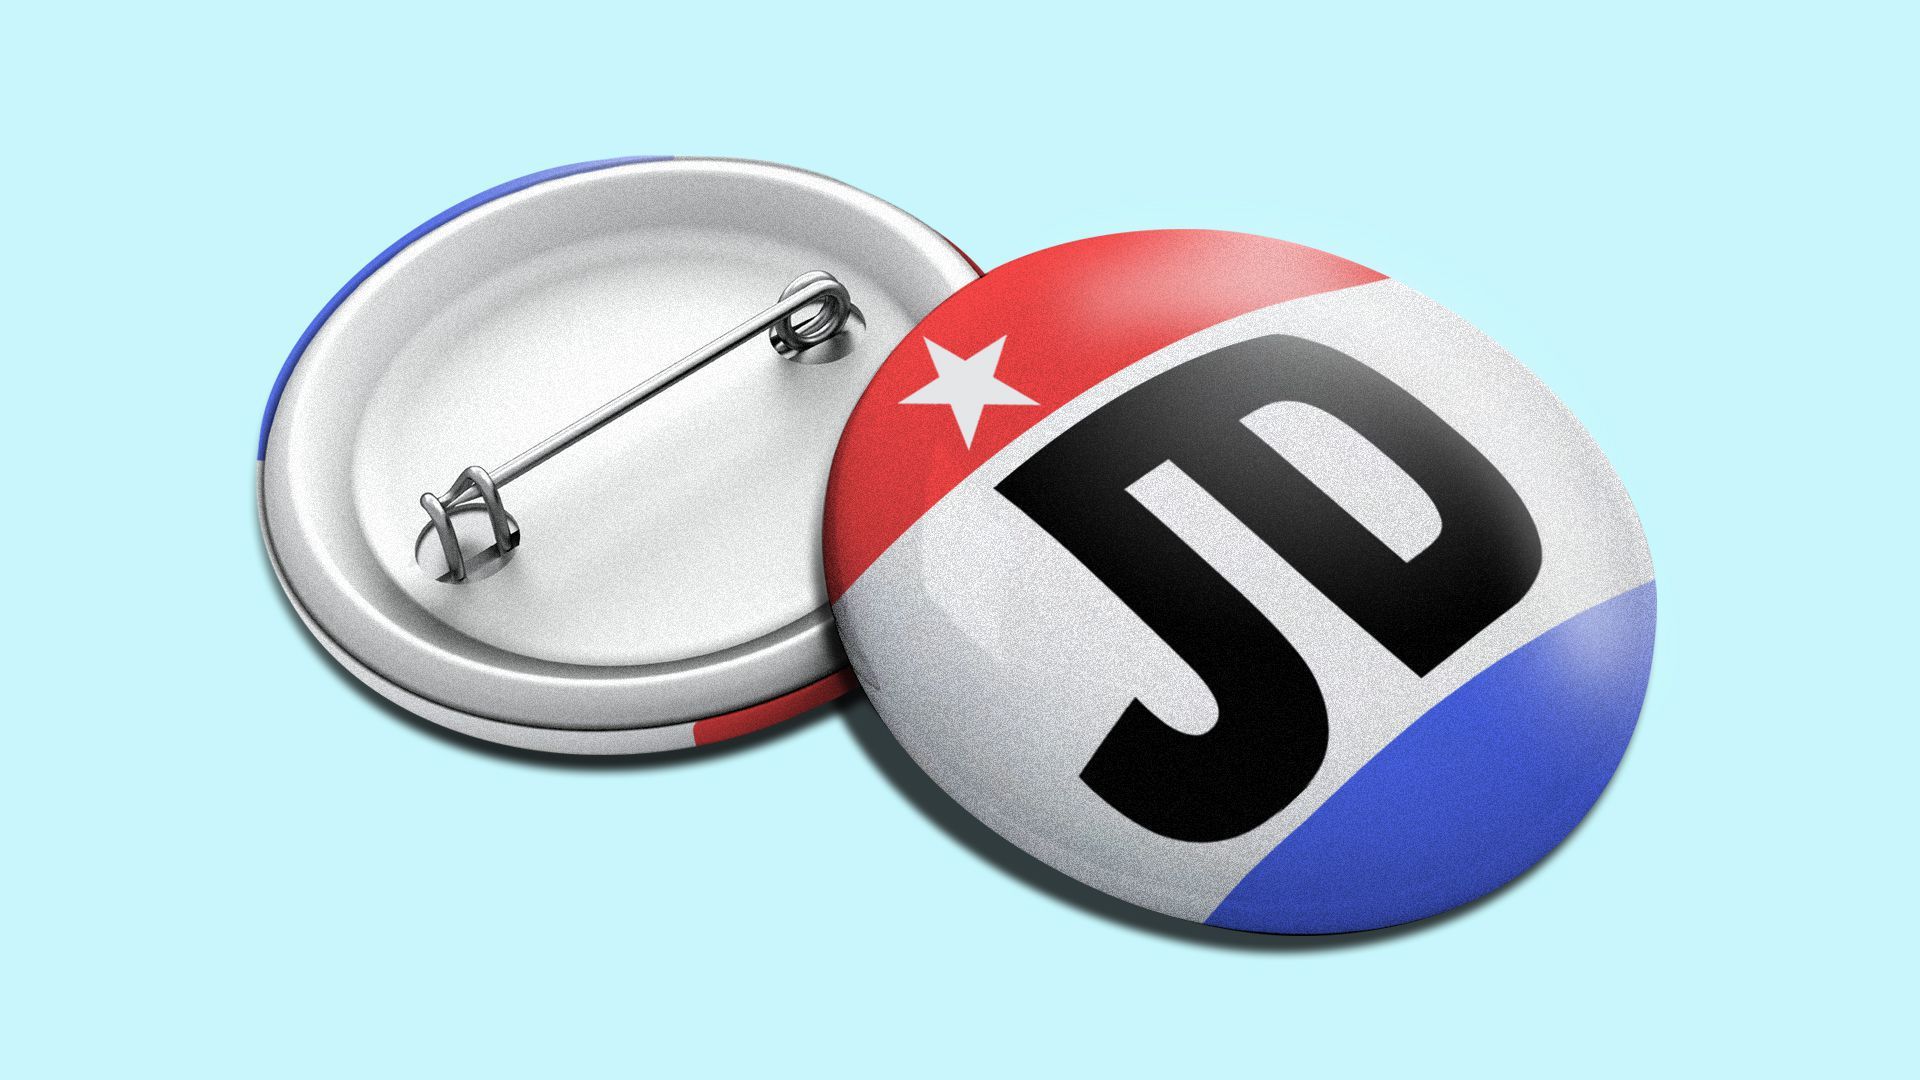 An illustration depicts a pair of campaign buttons for author and venture capitalist J.D. Vance.